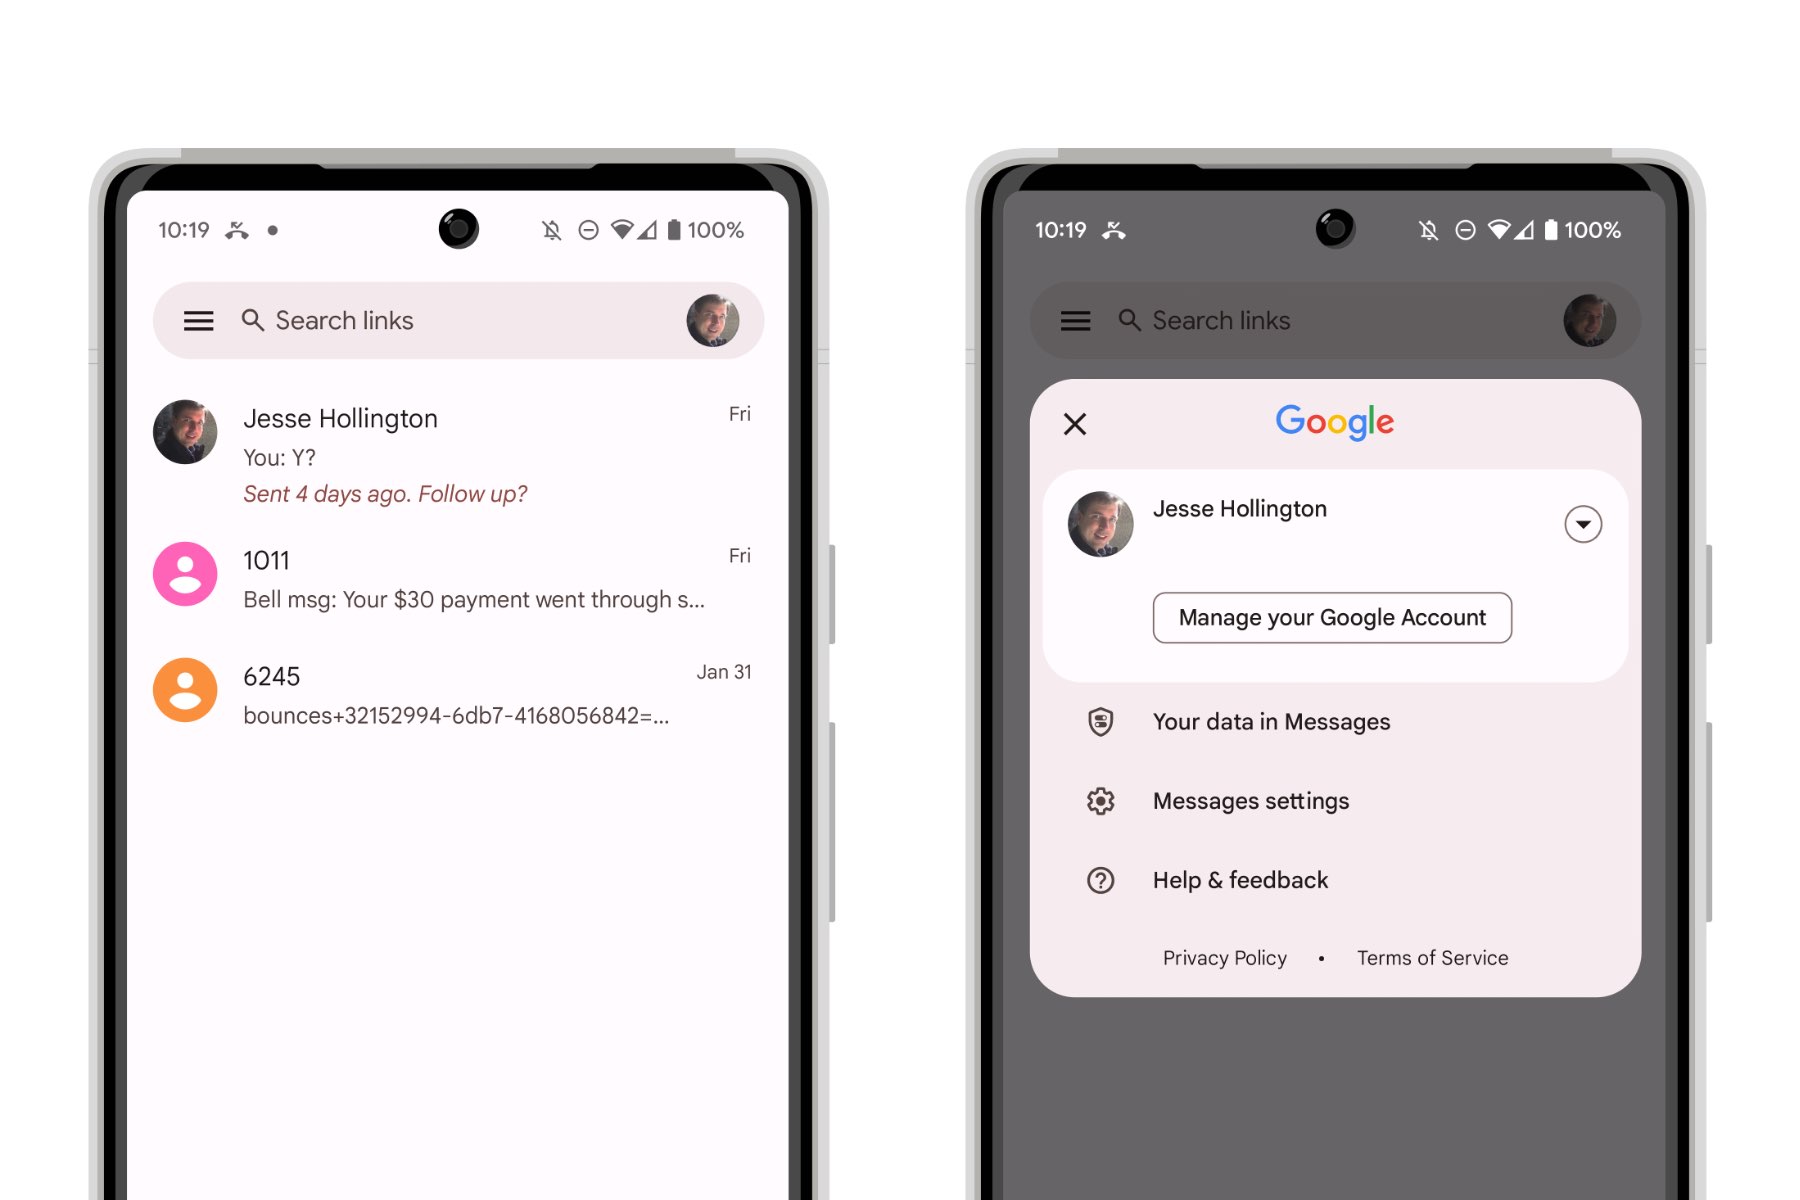 How to access settings in Google Messages